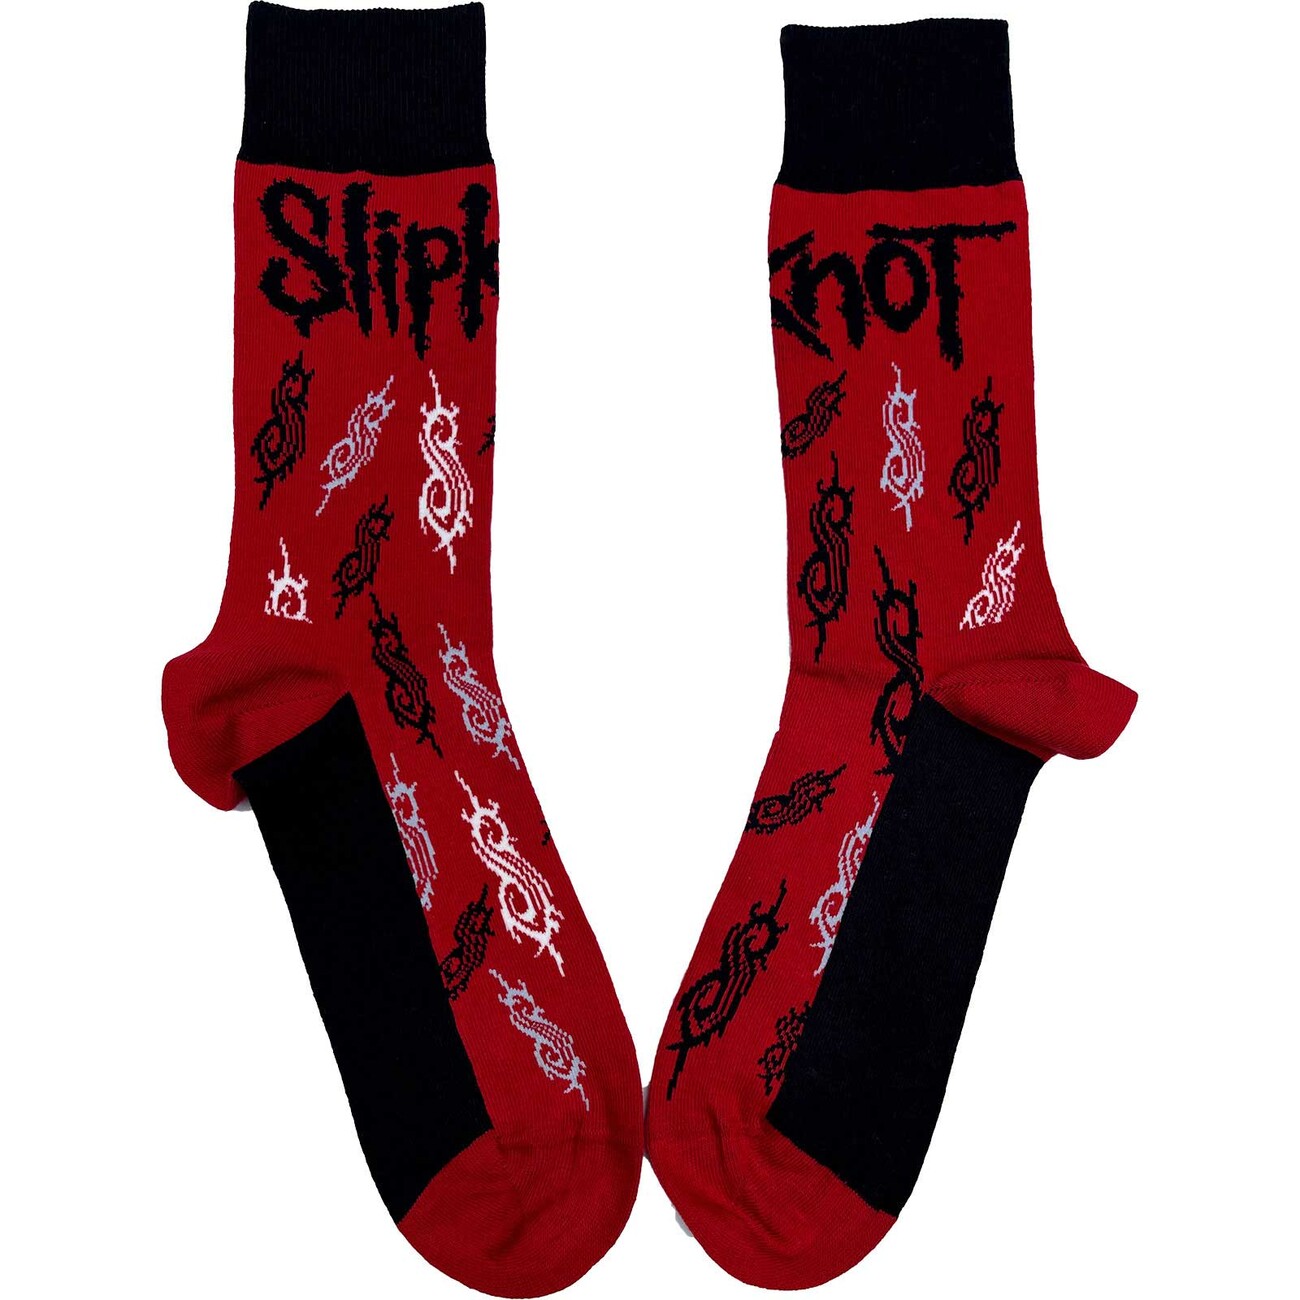 Socks Slipknot S | Clothes and accessories for merchandise fans